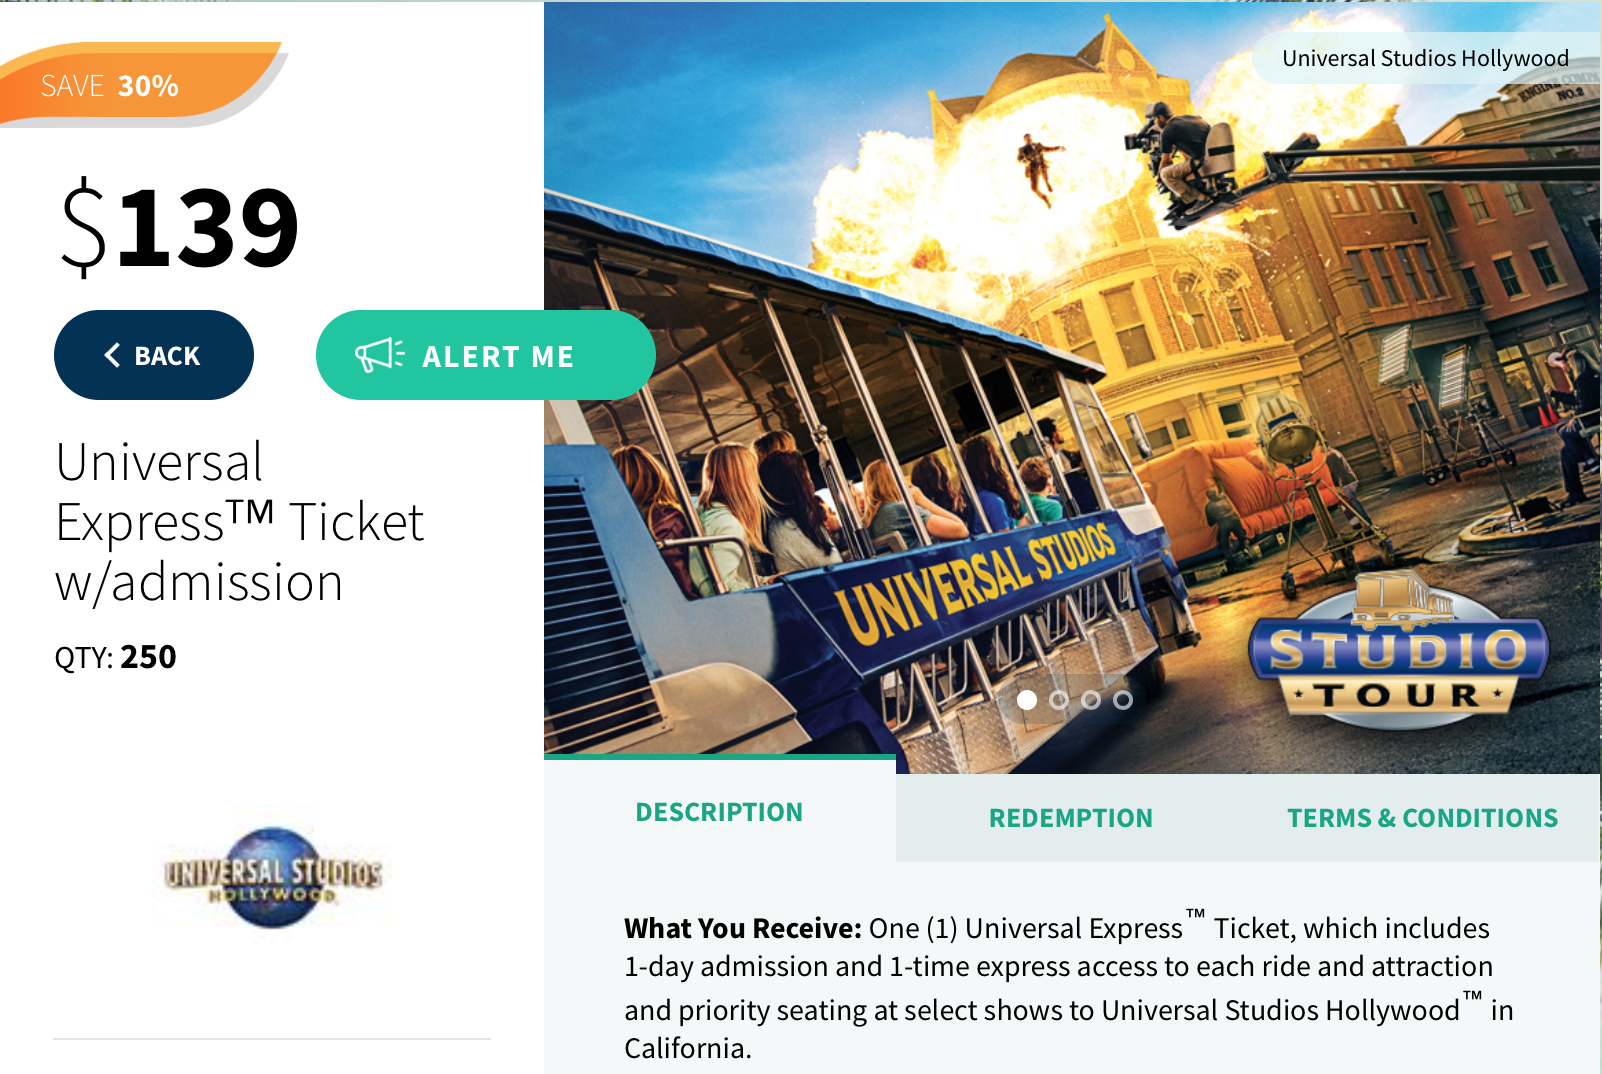 Great Deal On Universal Studios Hollywood Tickets Today Only! Pizza